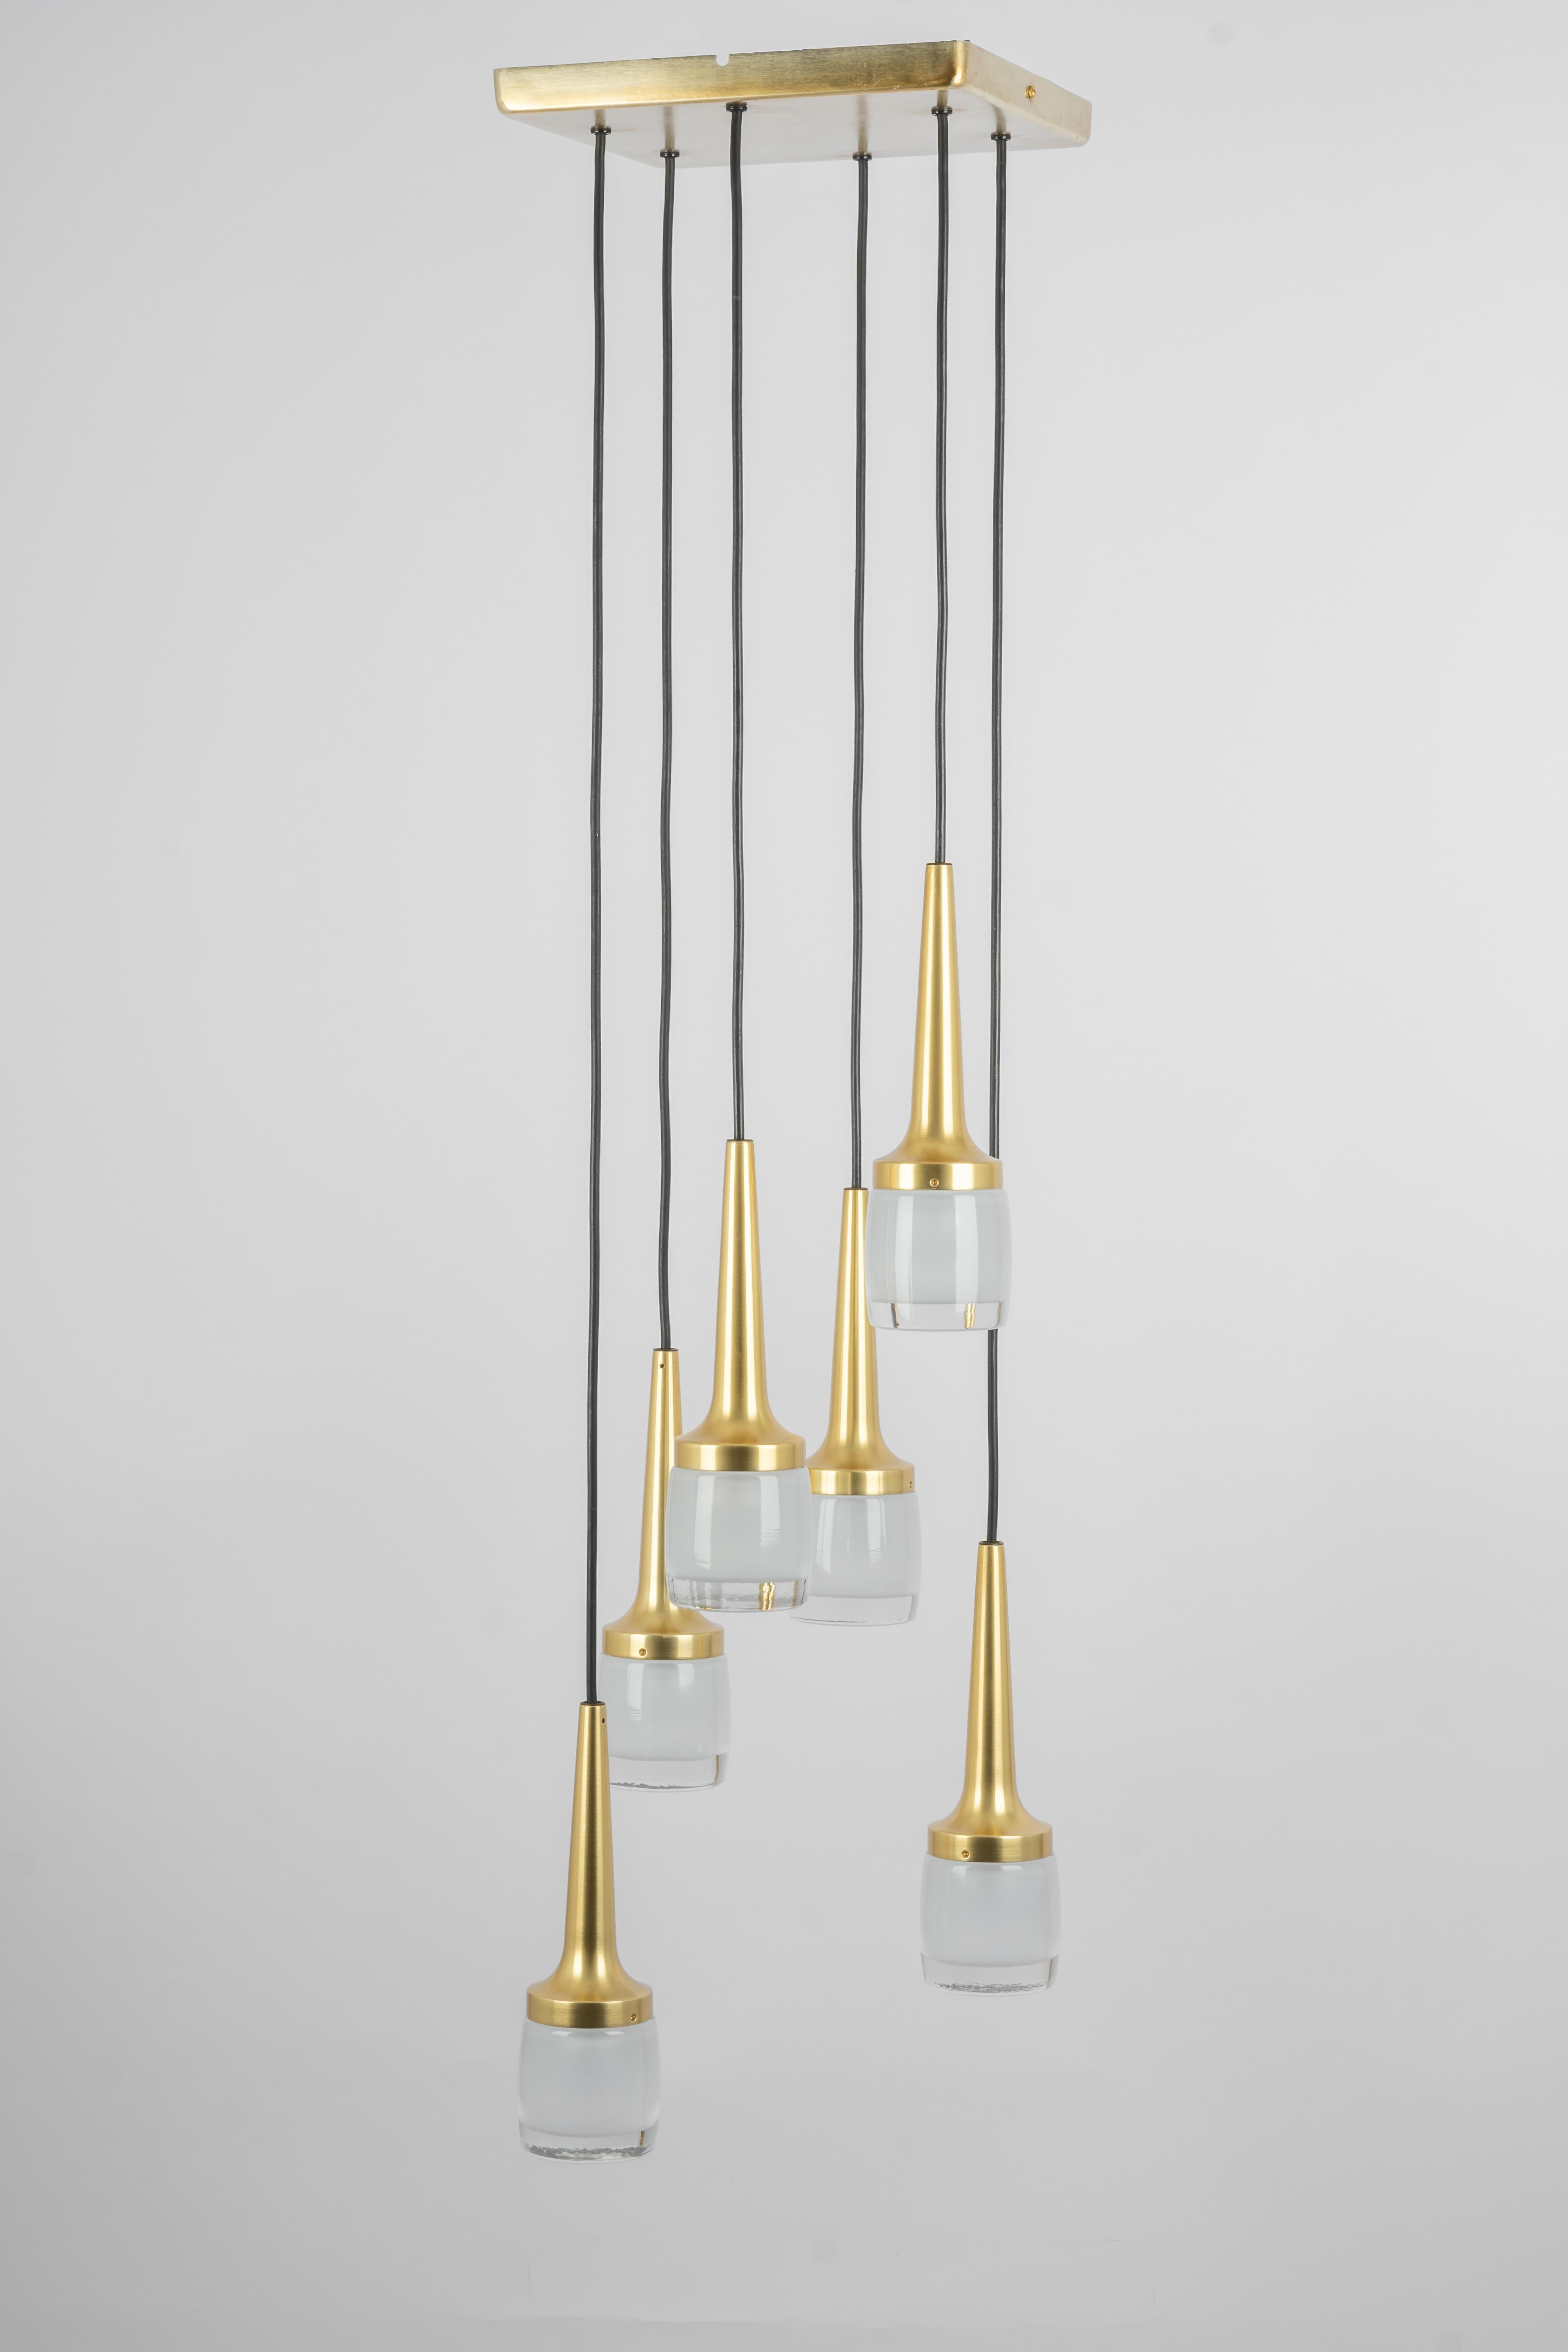 A special large cascading chandelier designed by Staff Leuchten, manufactured in Germany, circa the 1970s with 6 glasses.
Wonderful form and stunning light effect.
Sockets: 6 x E14 small bulbs. (40 W max for each bulb).
Light bulbs are not